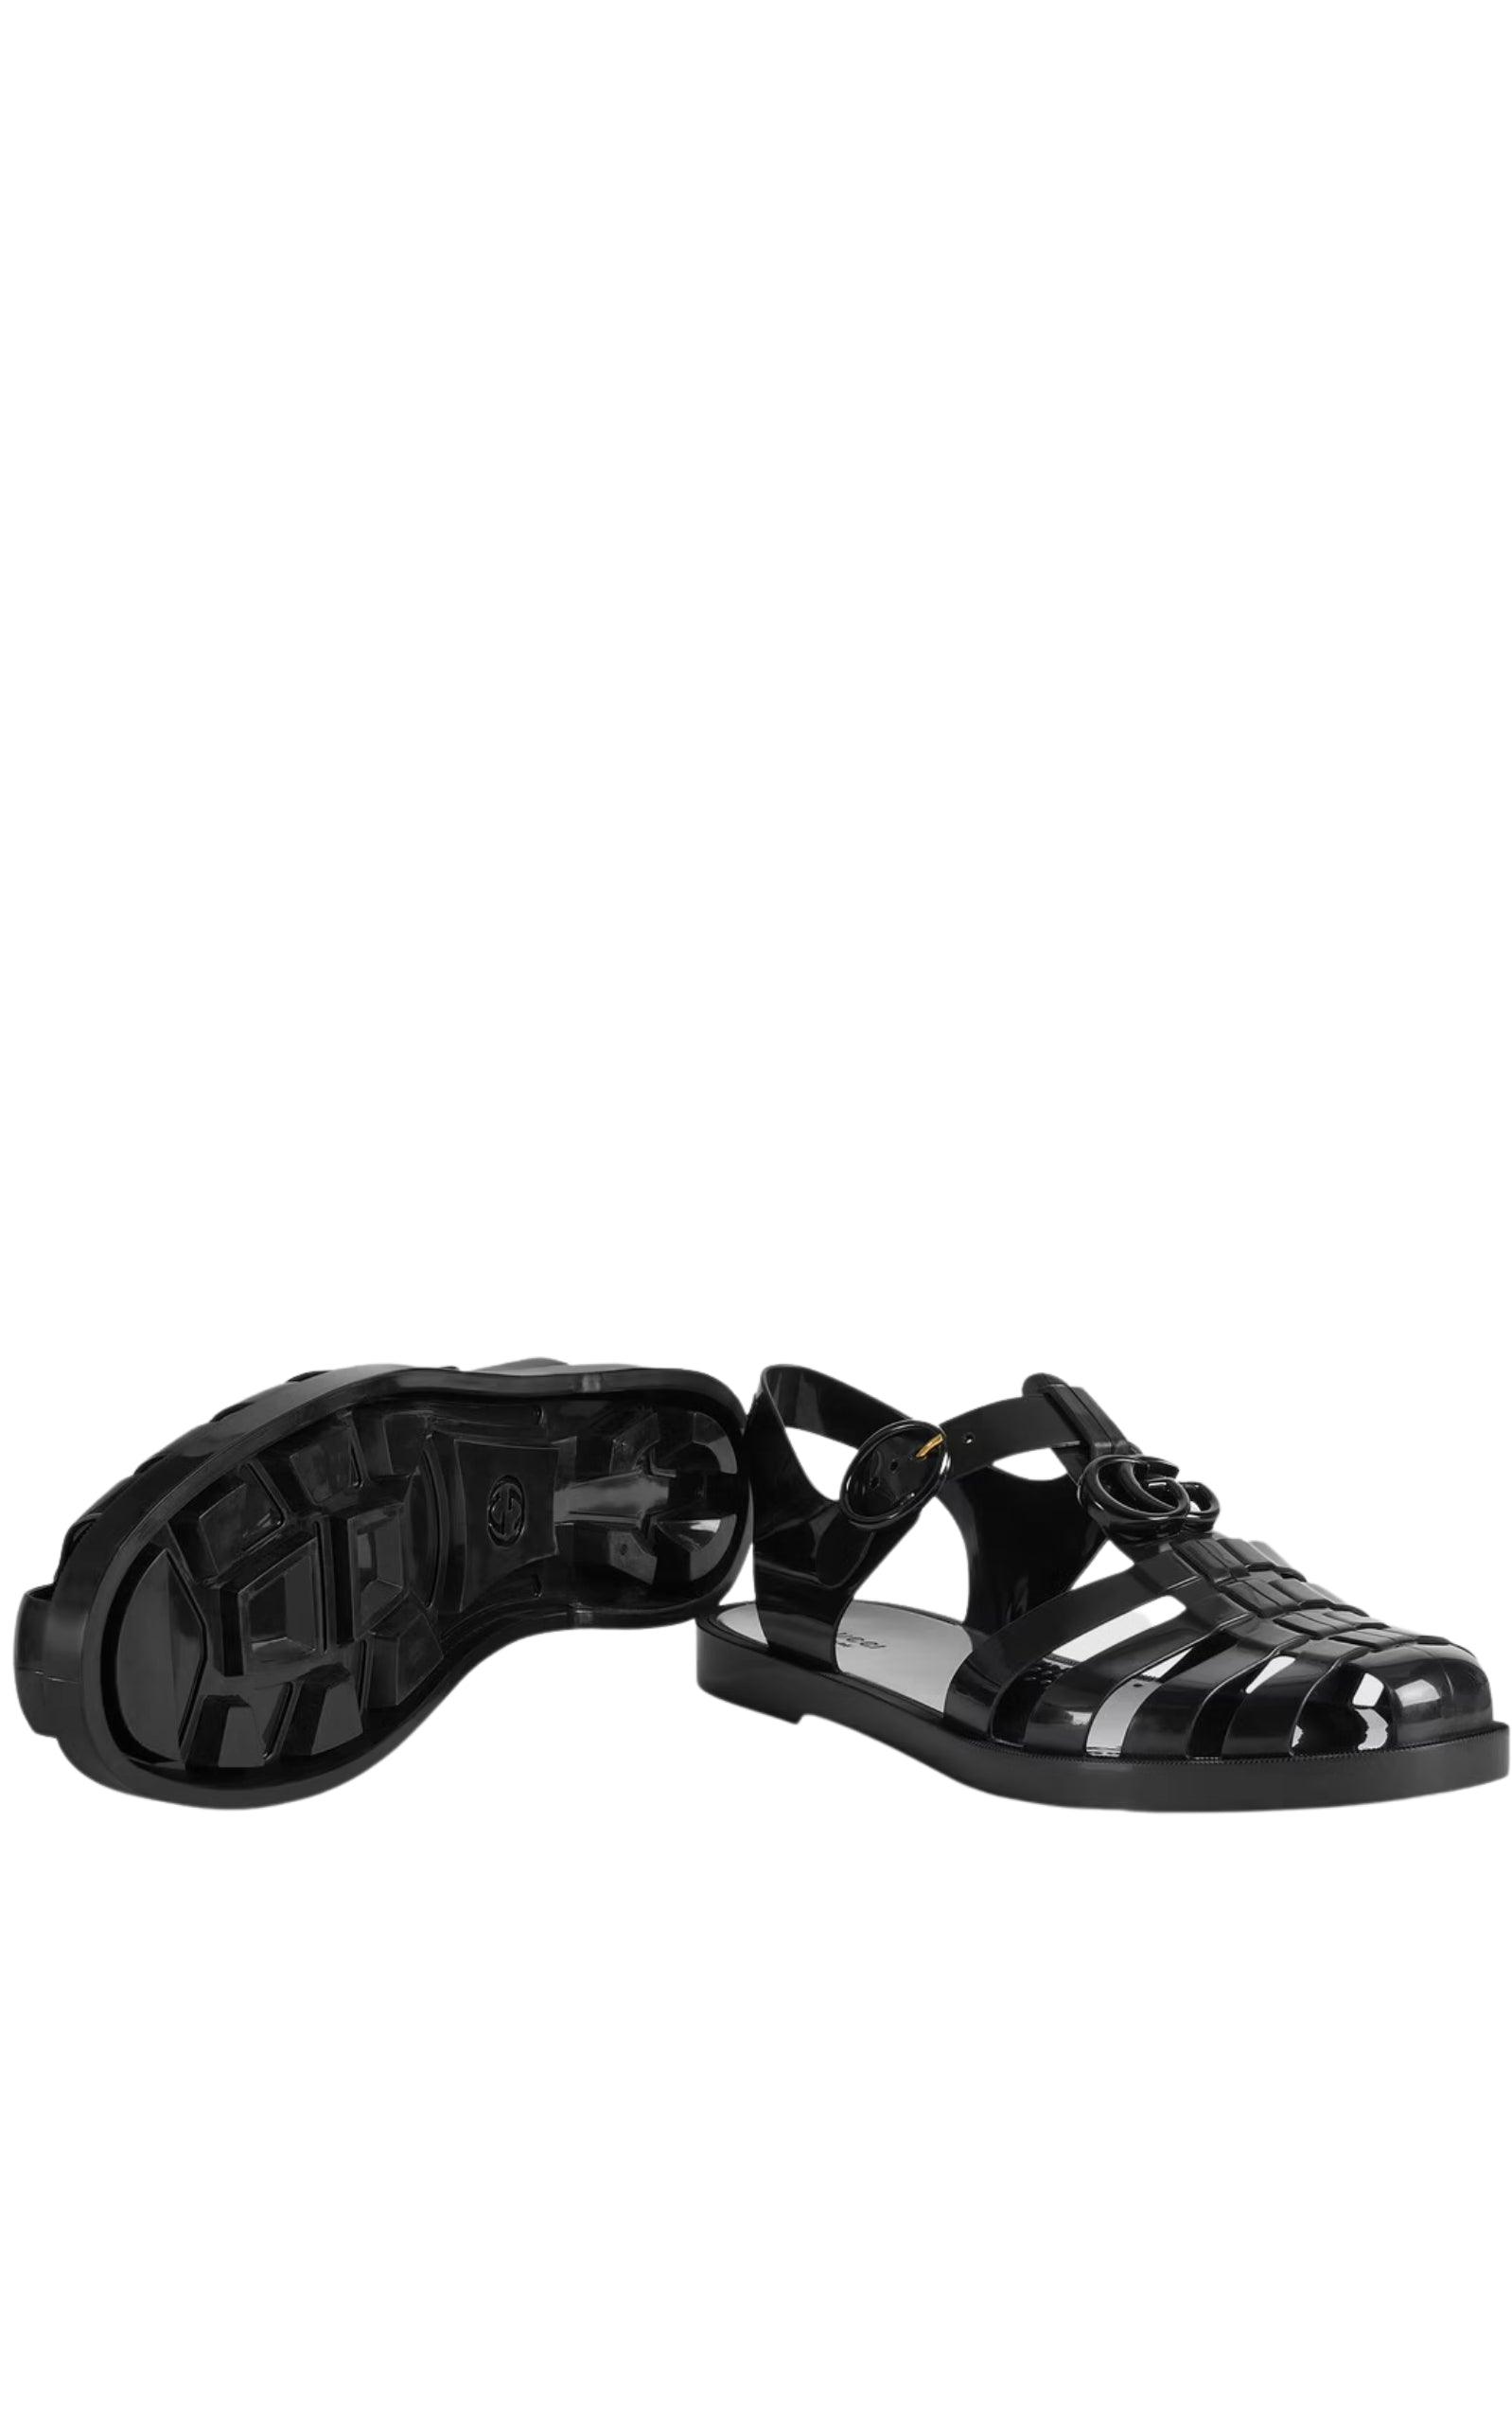  GucciGG Logo Cut-Out Strapped Sandals - Runway Catalog